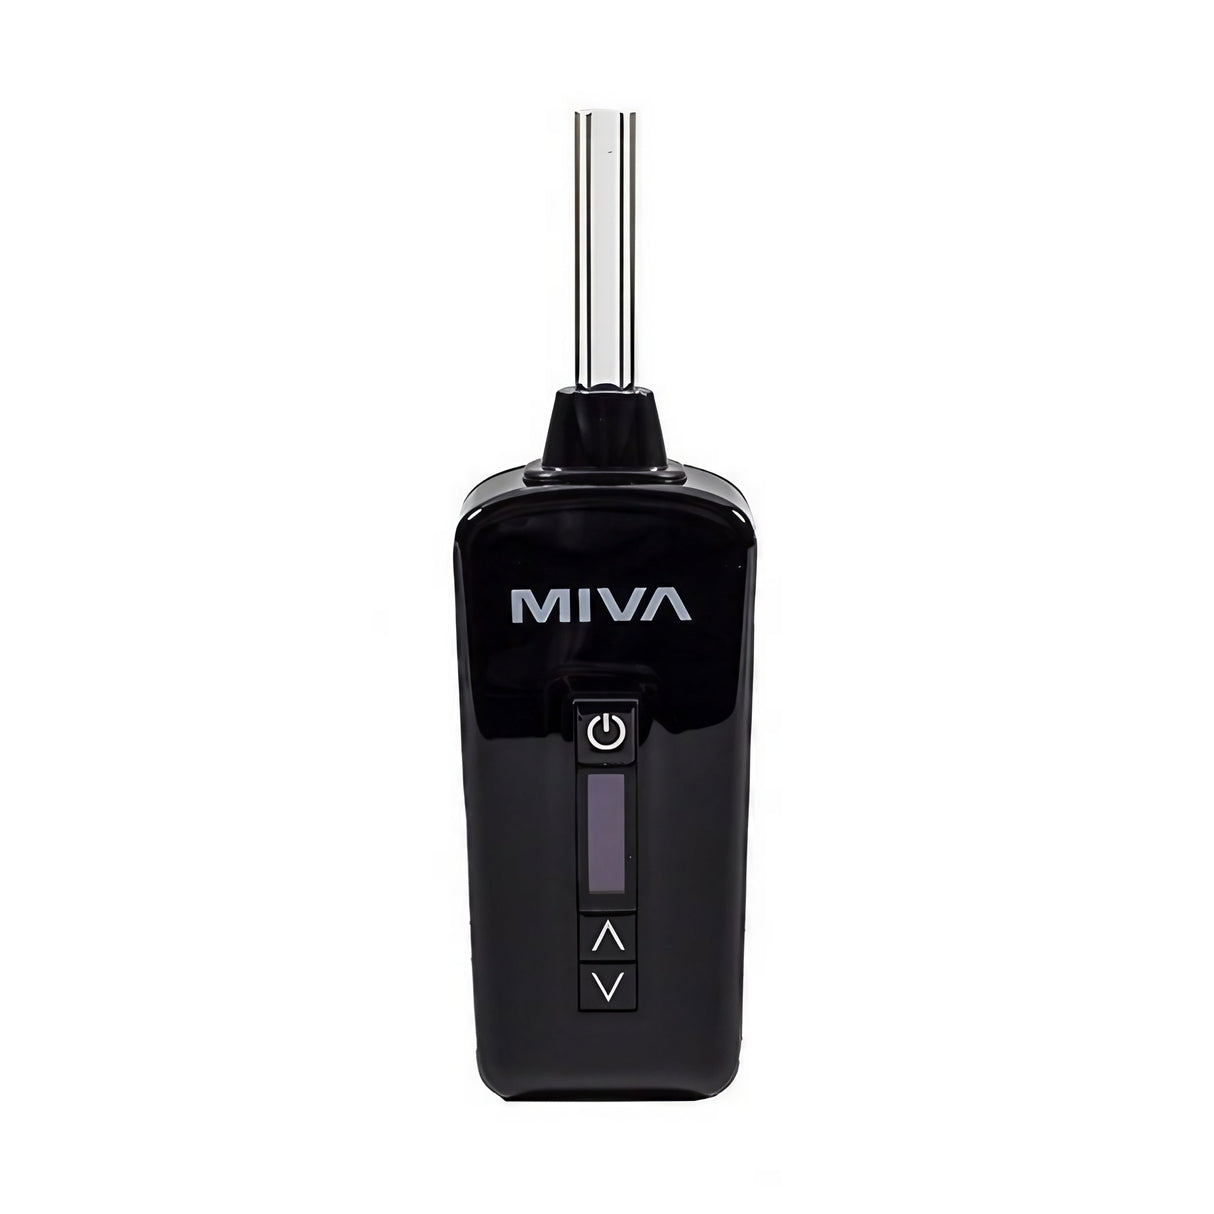 KandyPens MIVA 2 Vaporizer front view on seamless white background with power button visible